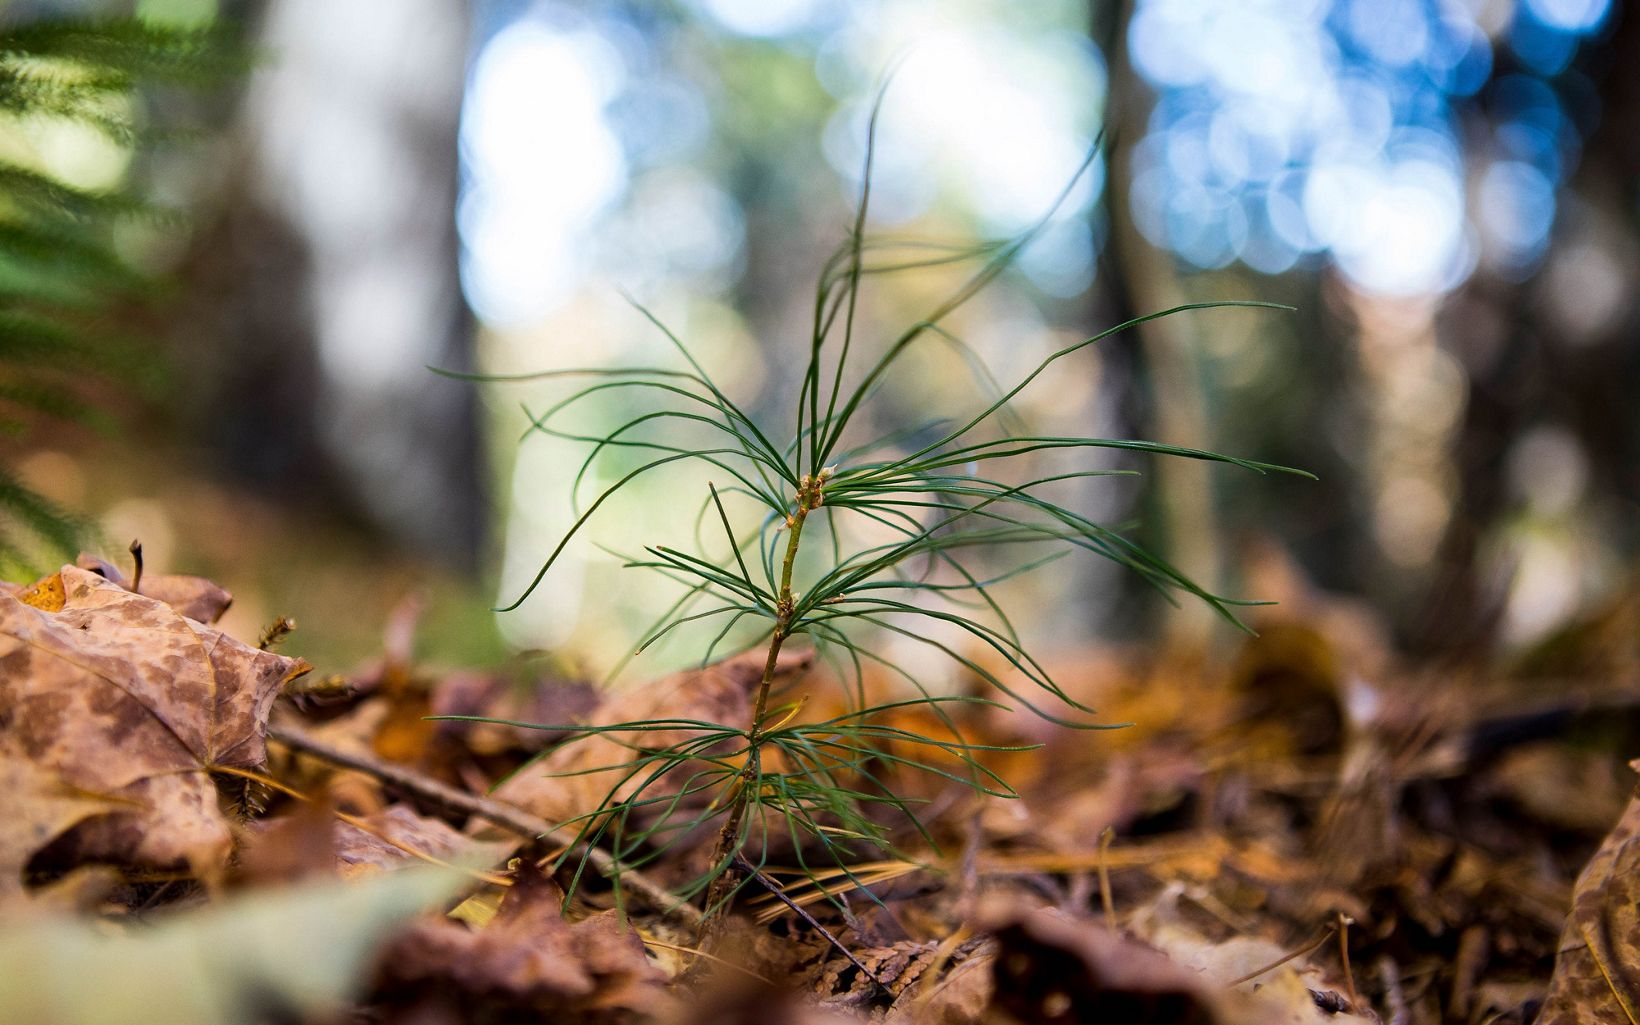 A tiny pine tree emerging from the leaf litter in a forested setting.